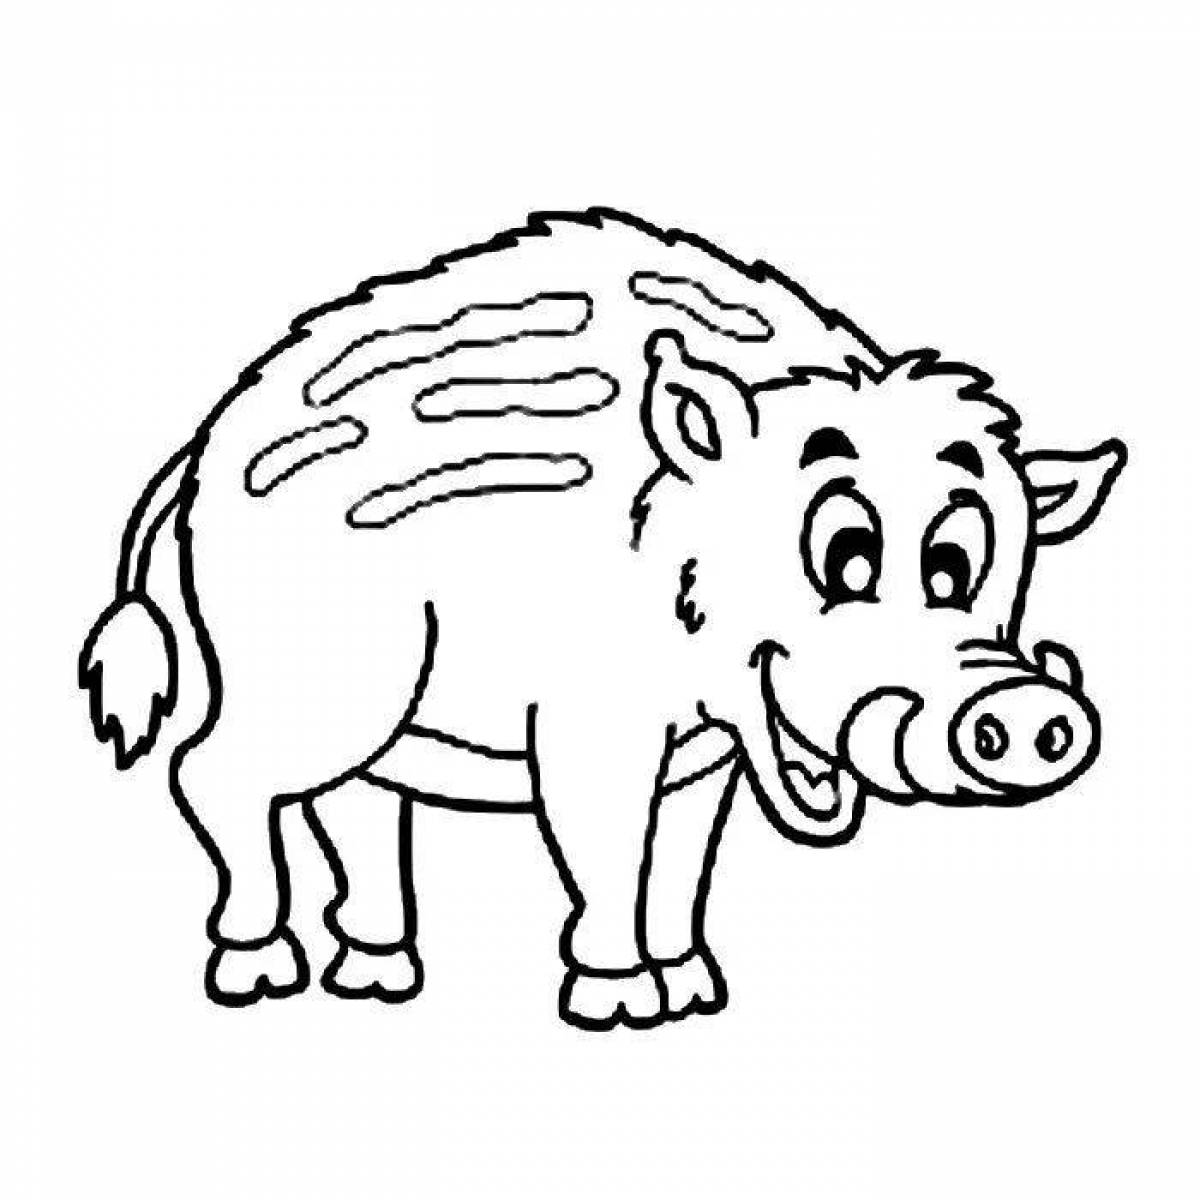 Innovative boar coloring page for kids